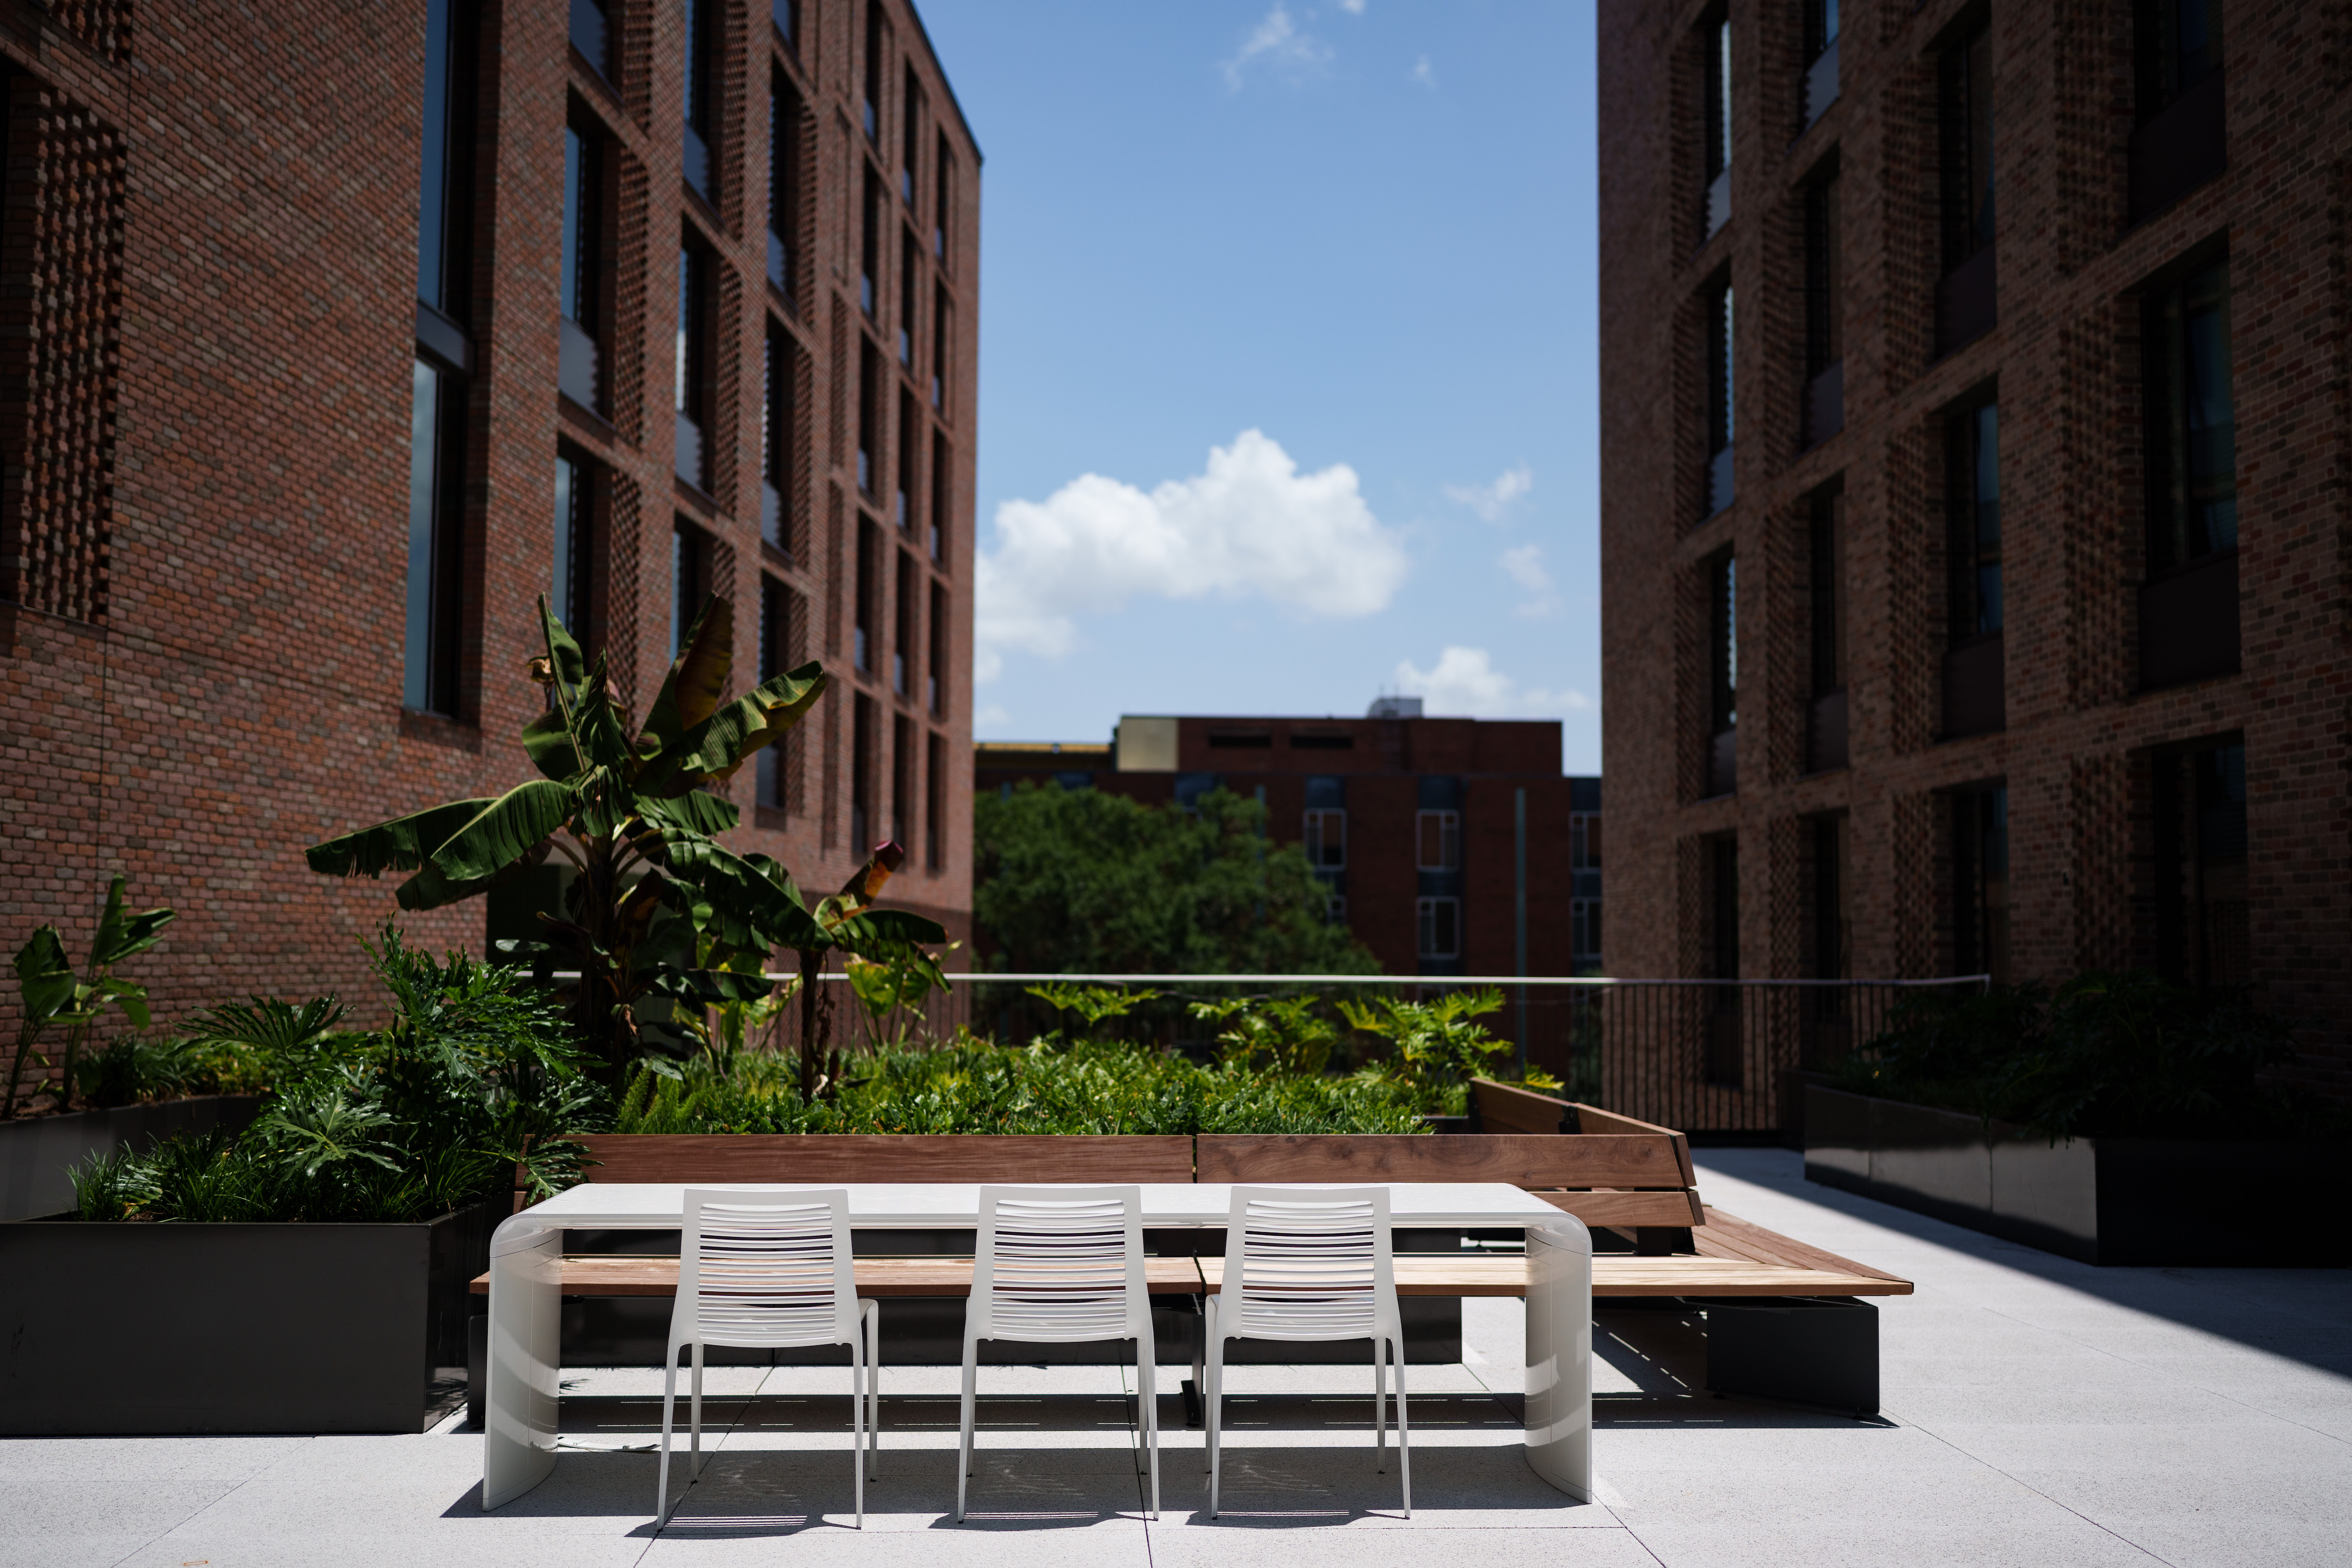 An outdoor courtyard between two looming buildings with greenery and seating